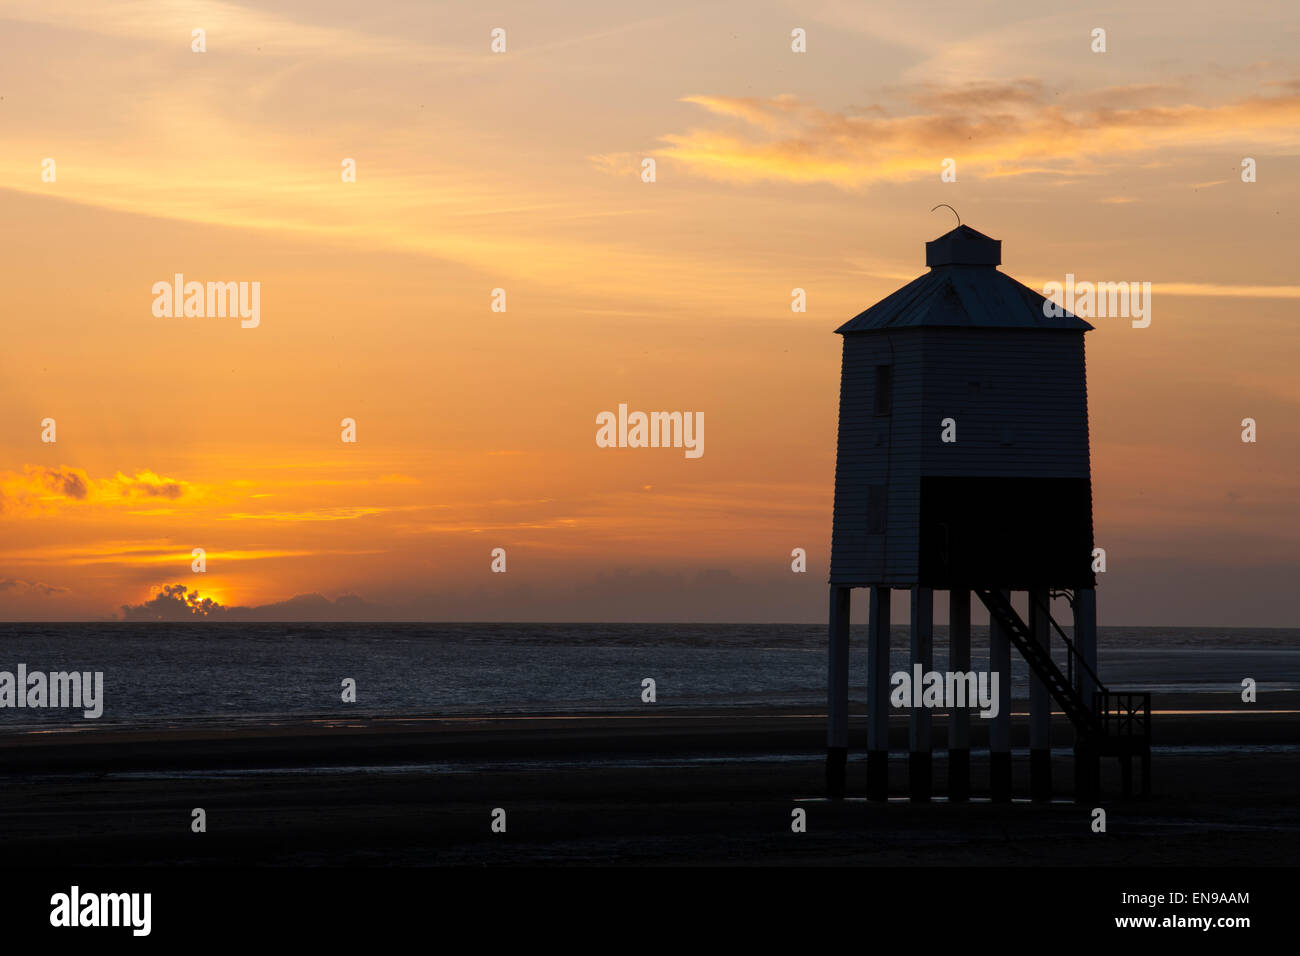 A sunset view of the Lighthouse at Burnham on Sea. Stock Photo